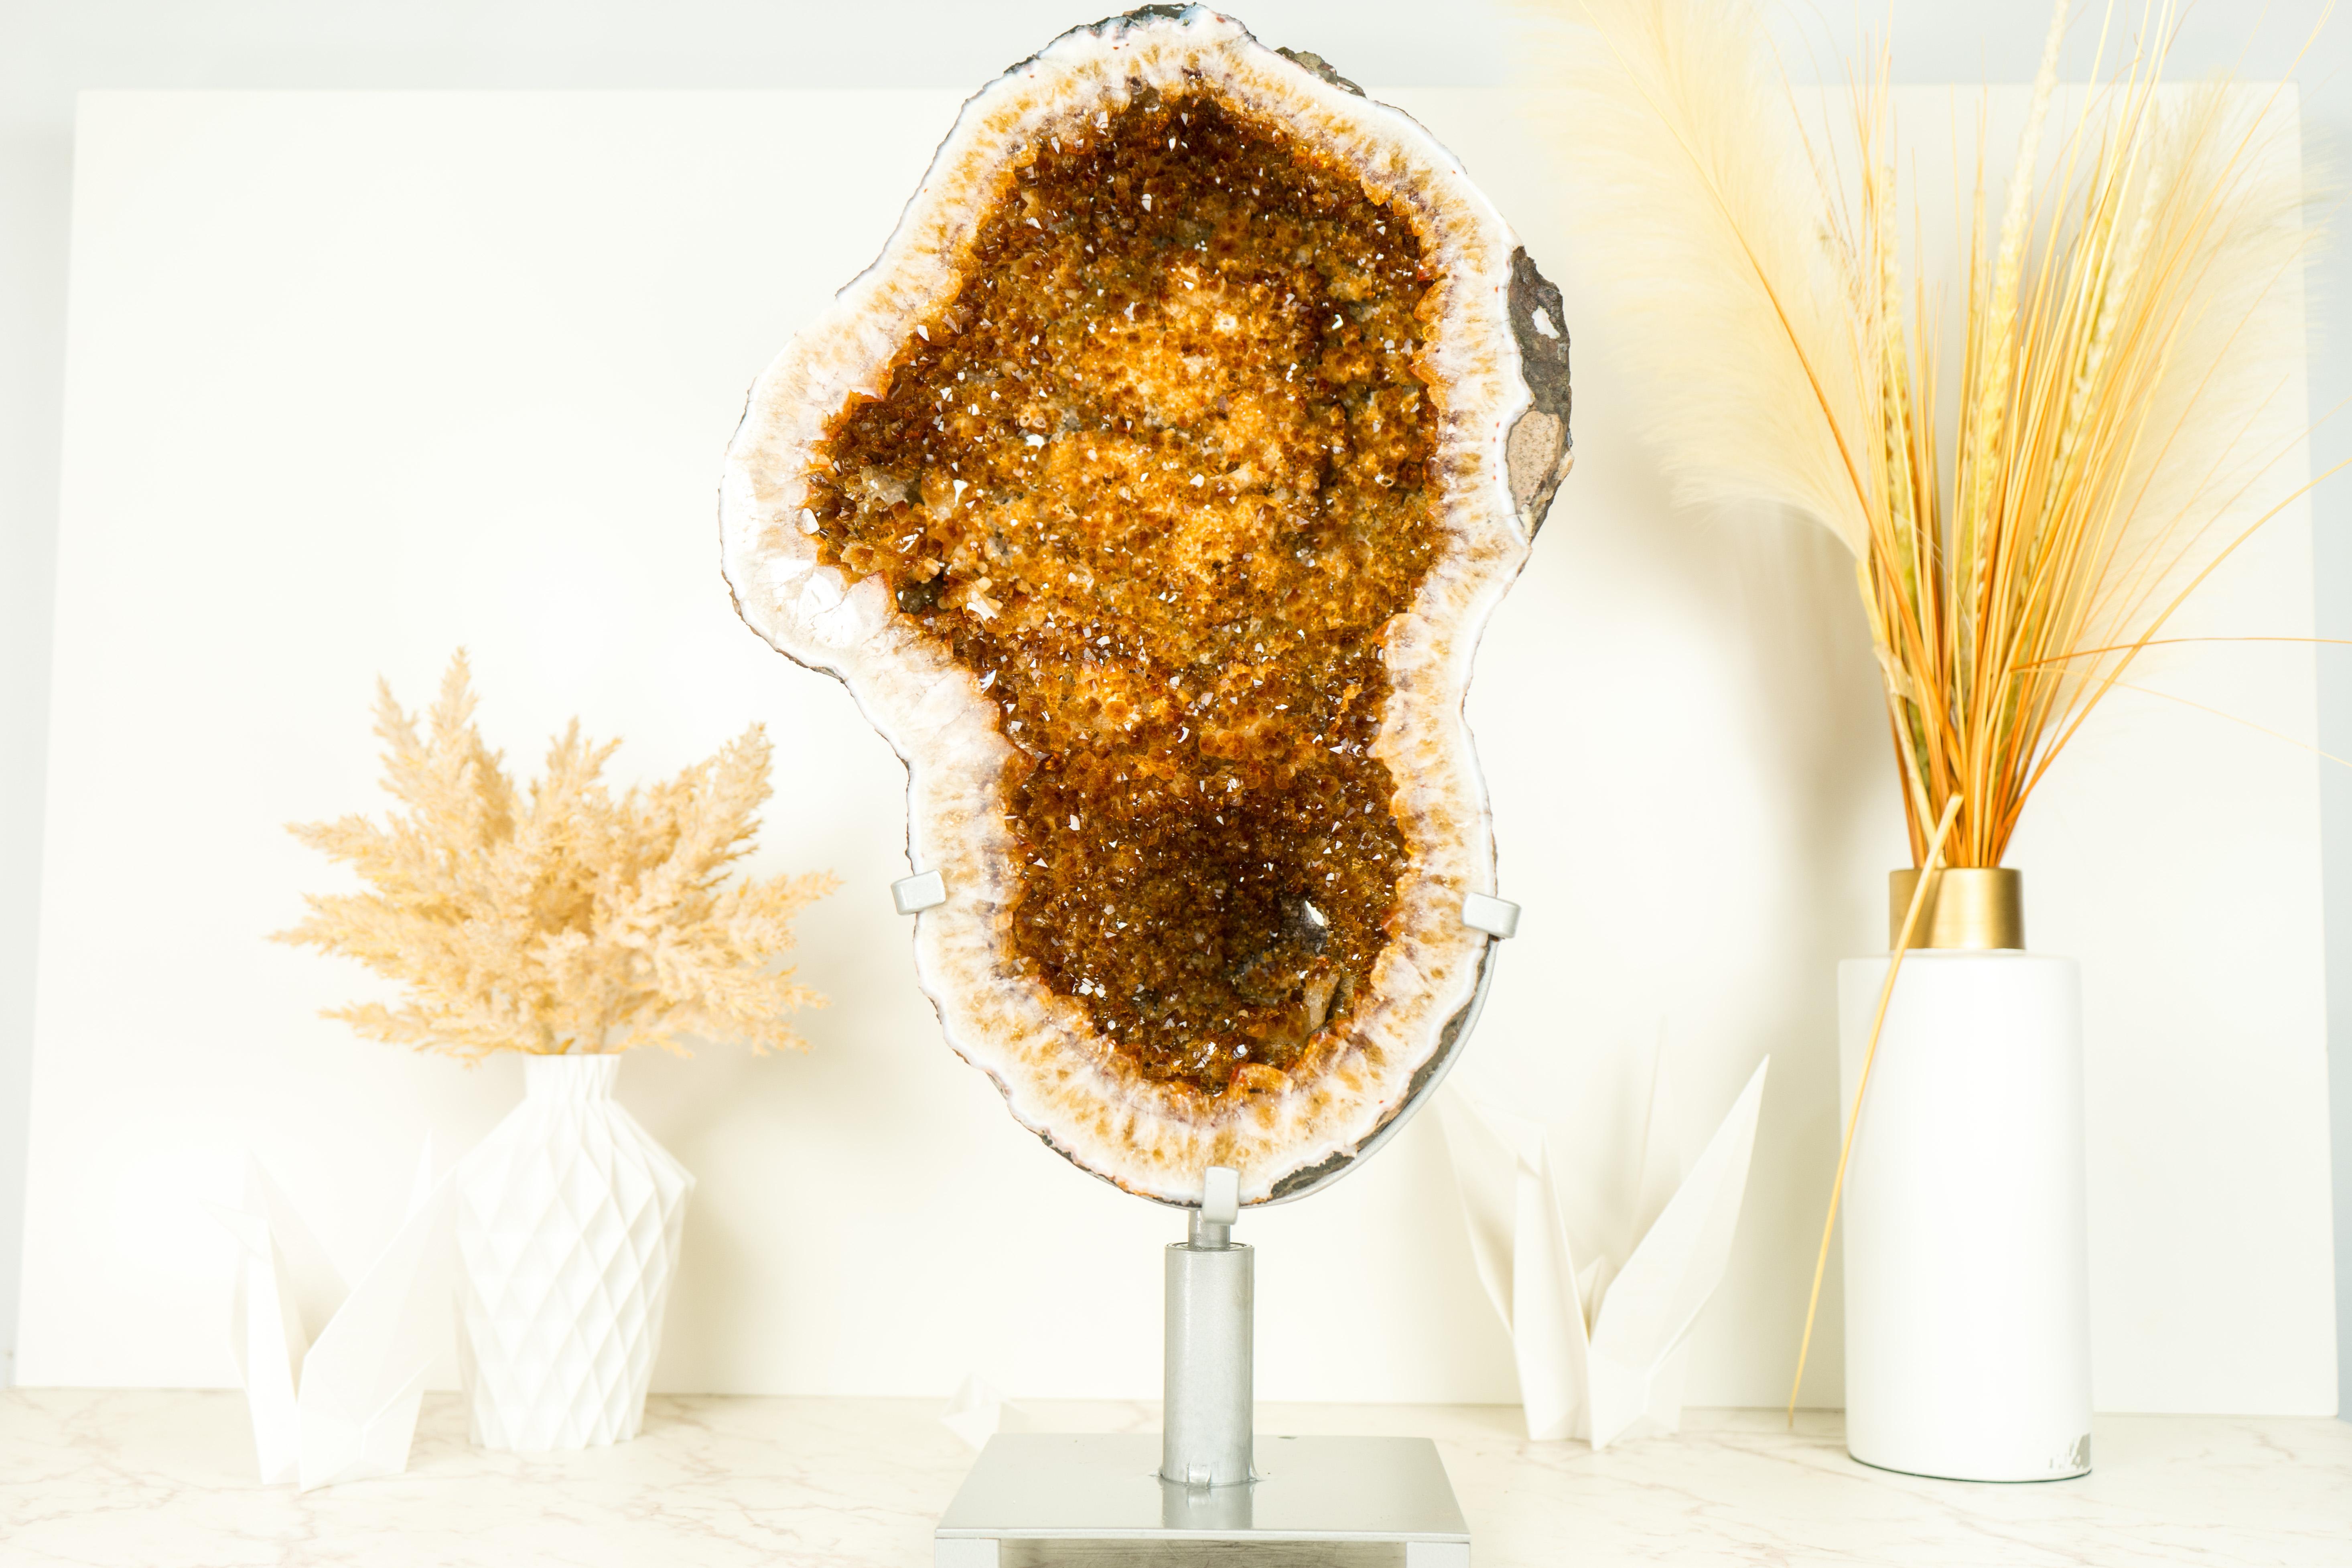 Contemporary Citrine Geode with Gorgeous Shiny Golden Orange Citrine Crystal Druzy For Sale